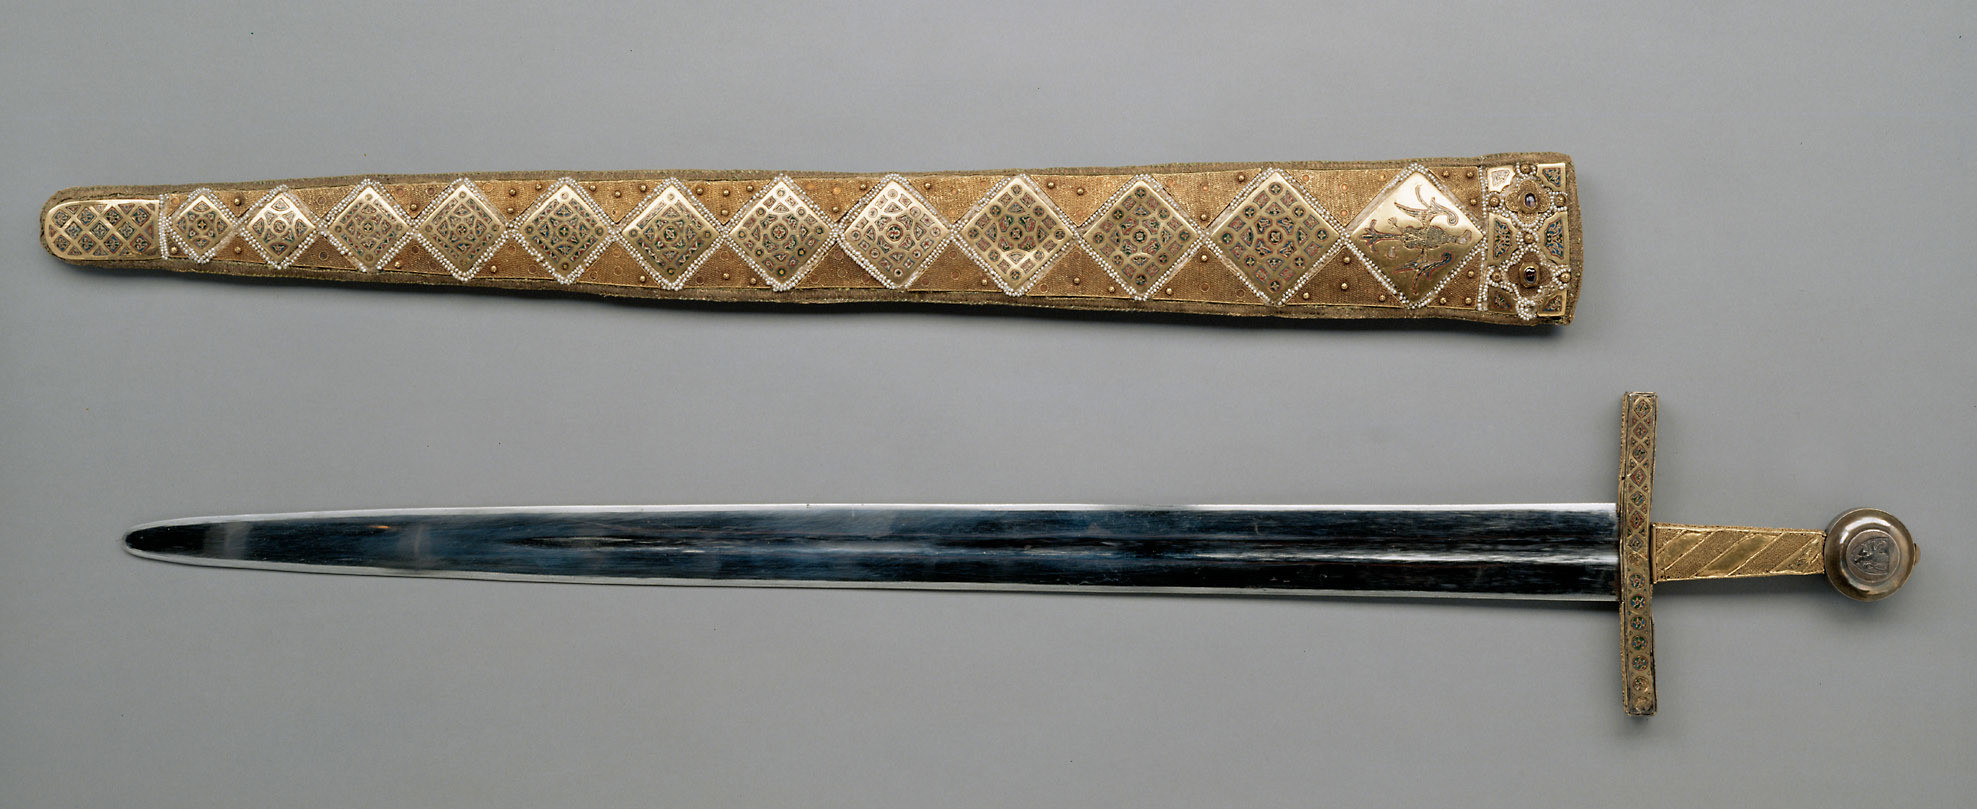 Ceremonial sword of Emperor Frederick II with scabbard, made in Palermo before 1220, today in Vienna.